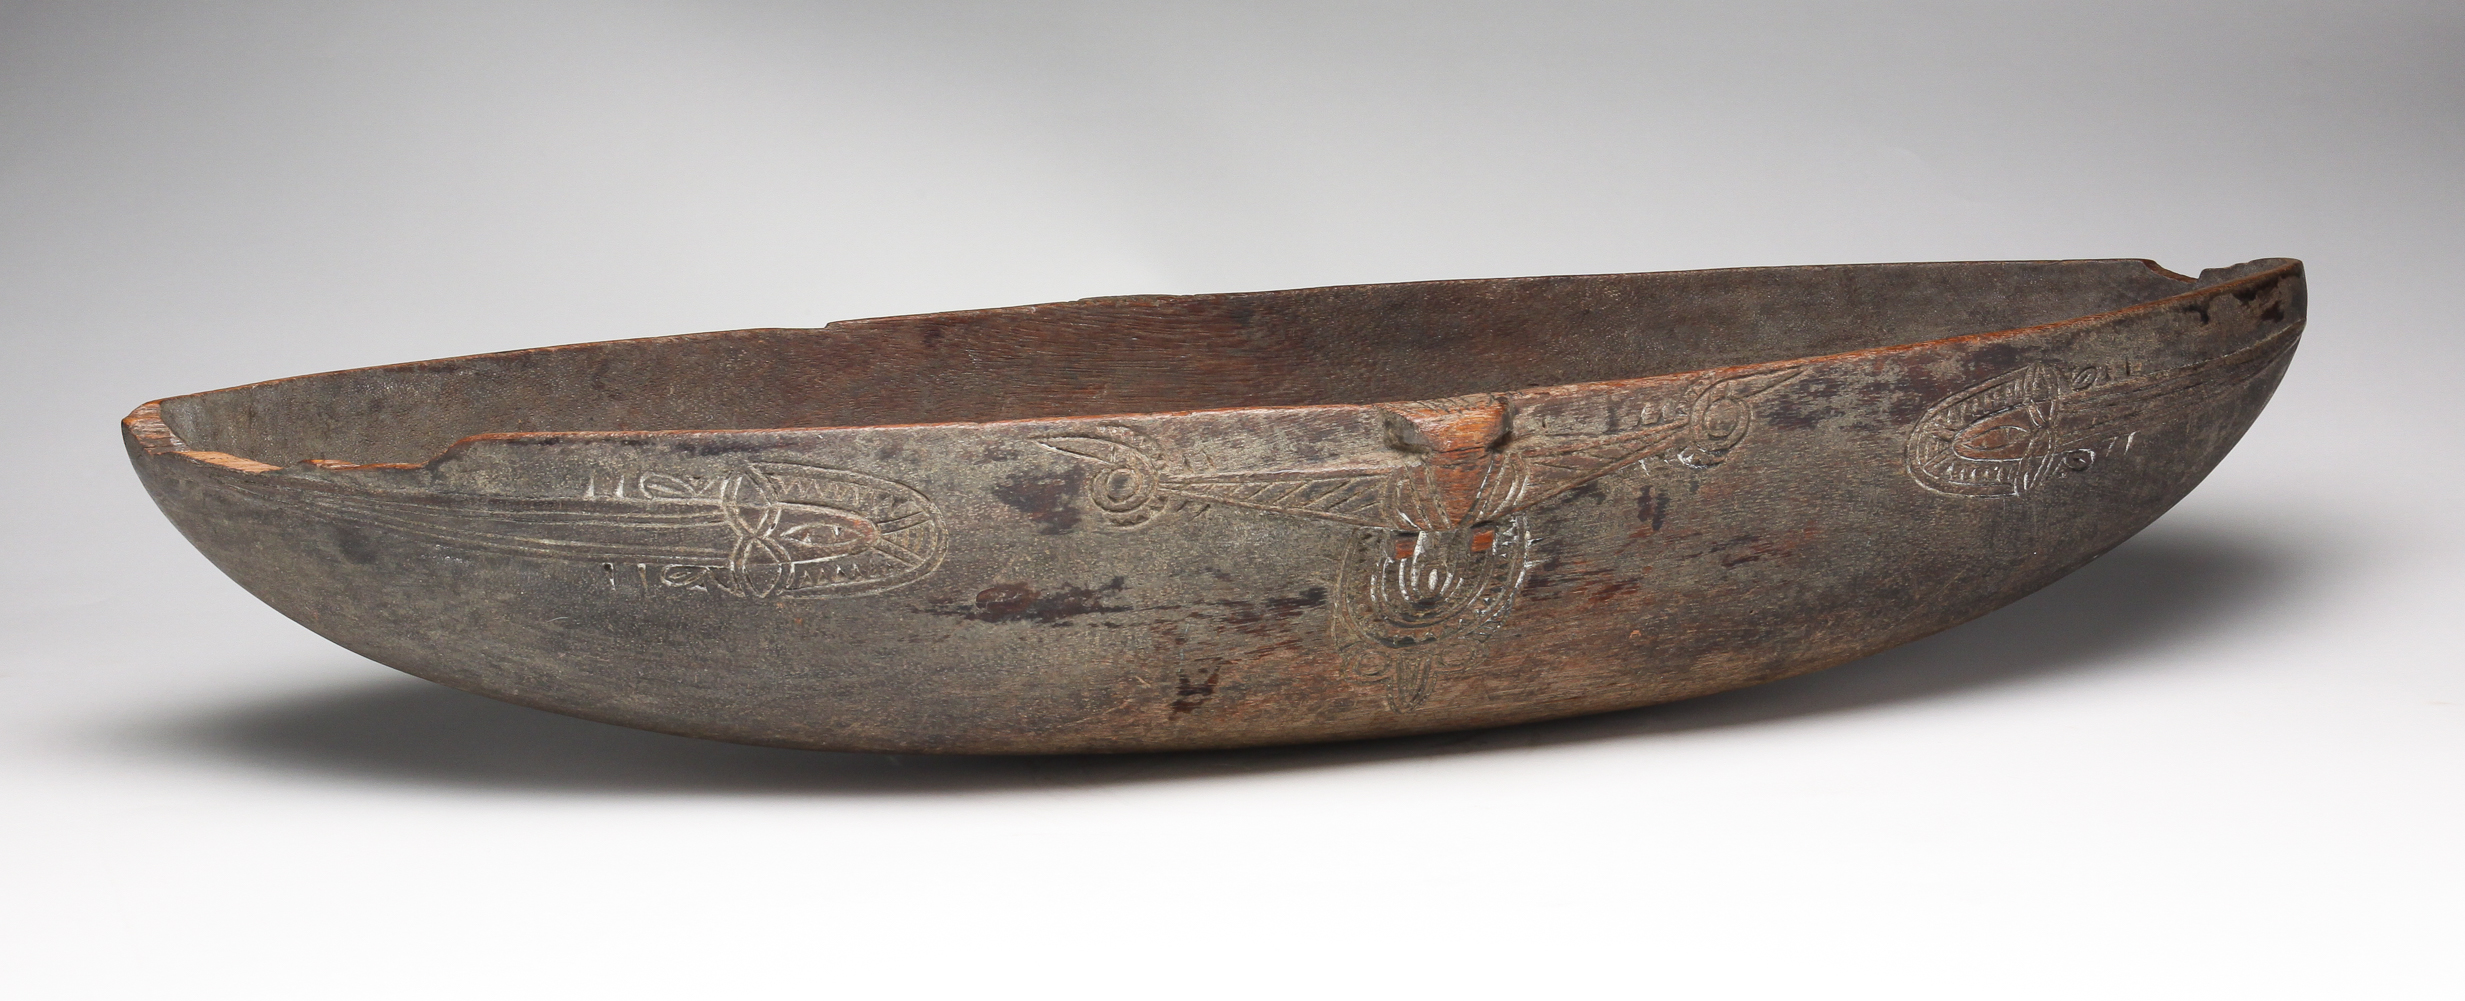 PAPUA/NEW GUINEA CARVED FEAST BOWL.